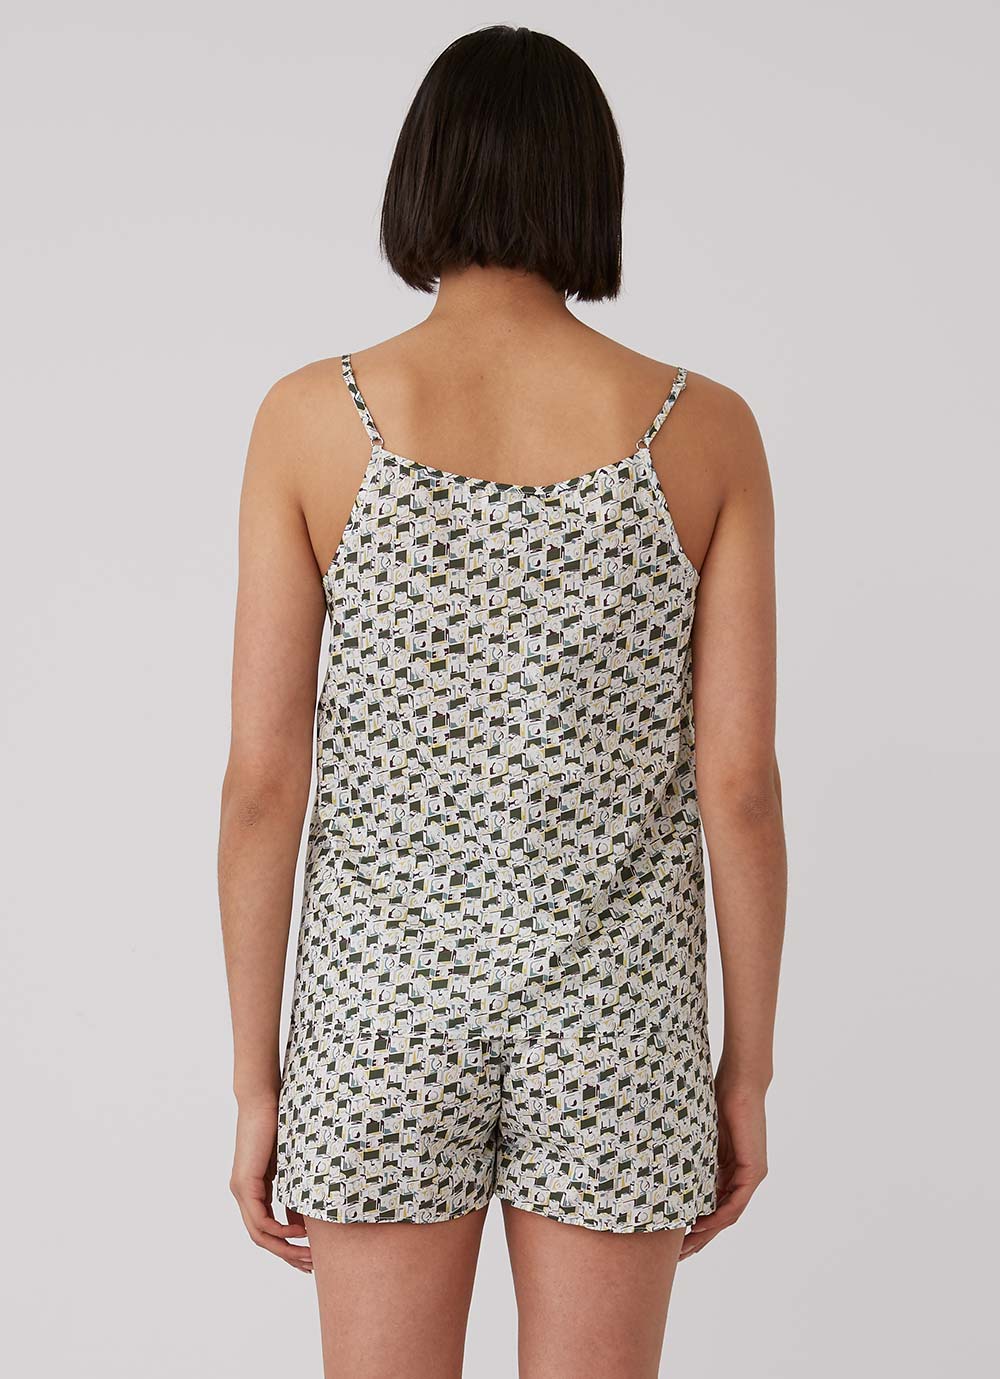 Women's Printed Cotton Cami in Liberty Cameras